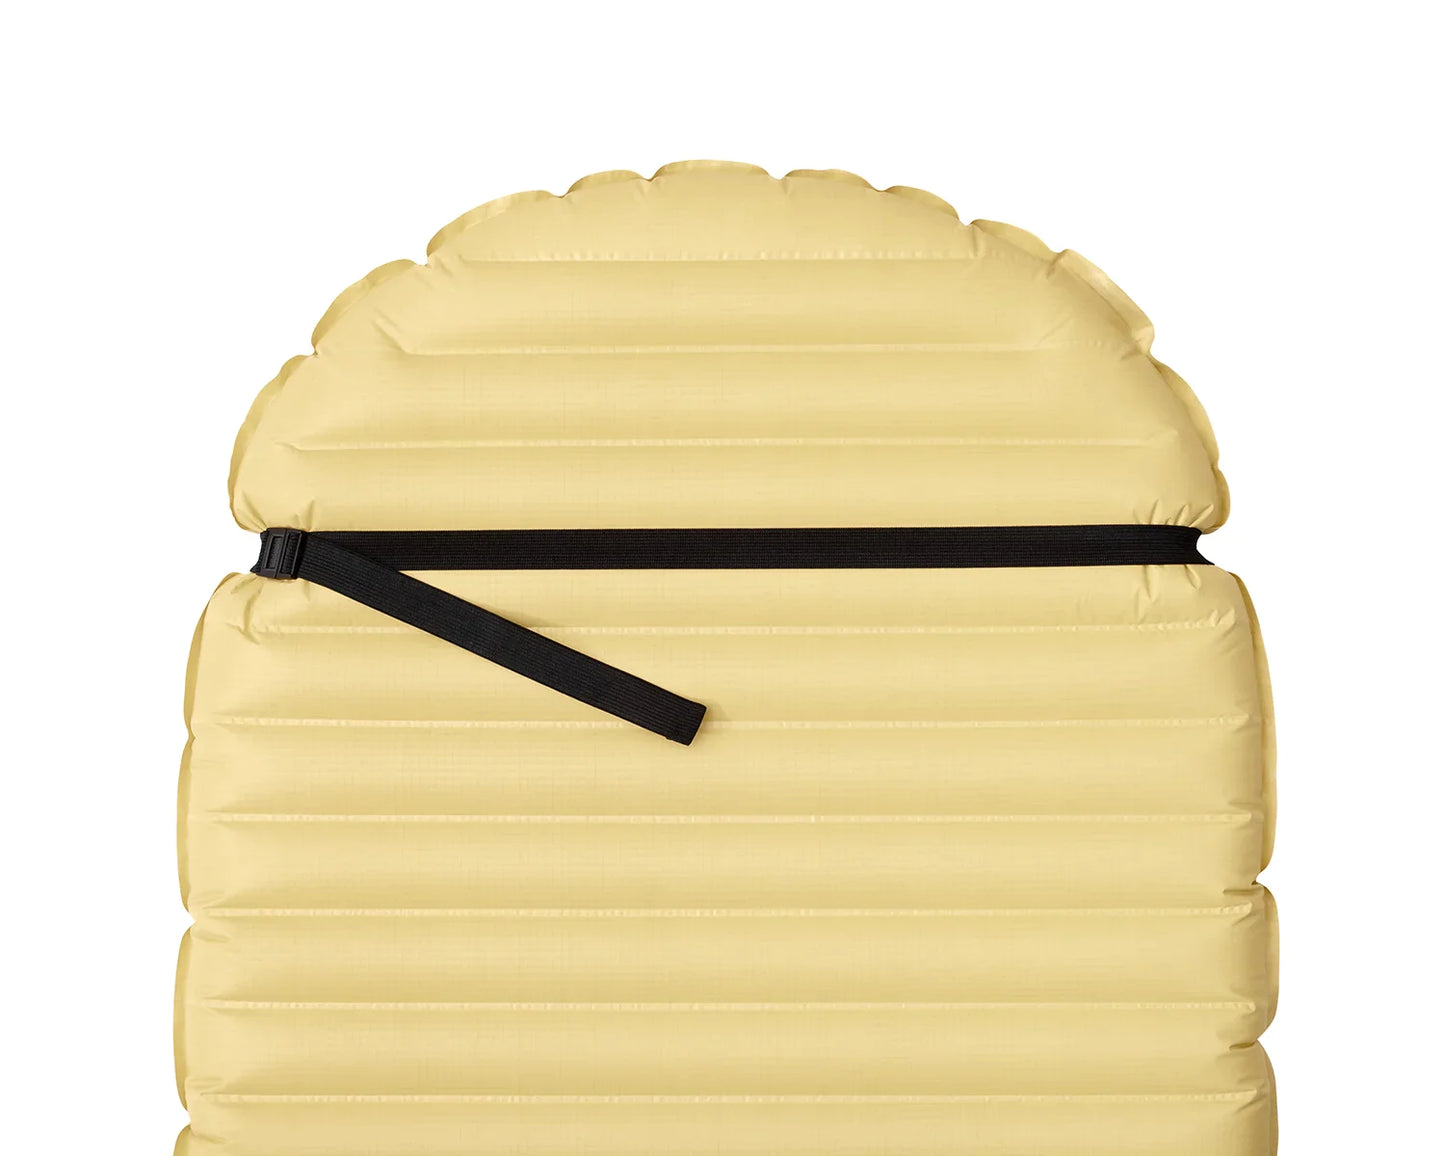 Bottom view of sleeping pad with pillow strap attached showing flat buckle and strap.